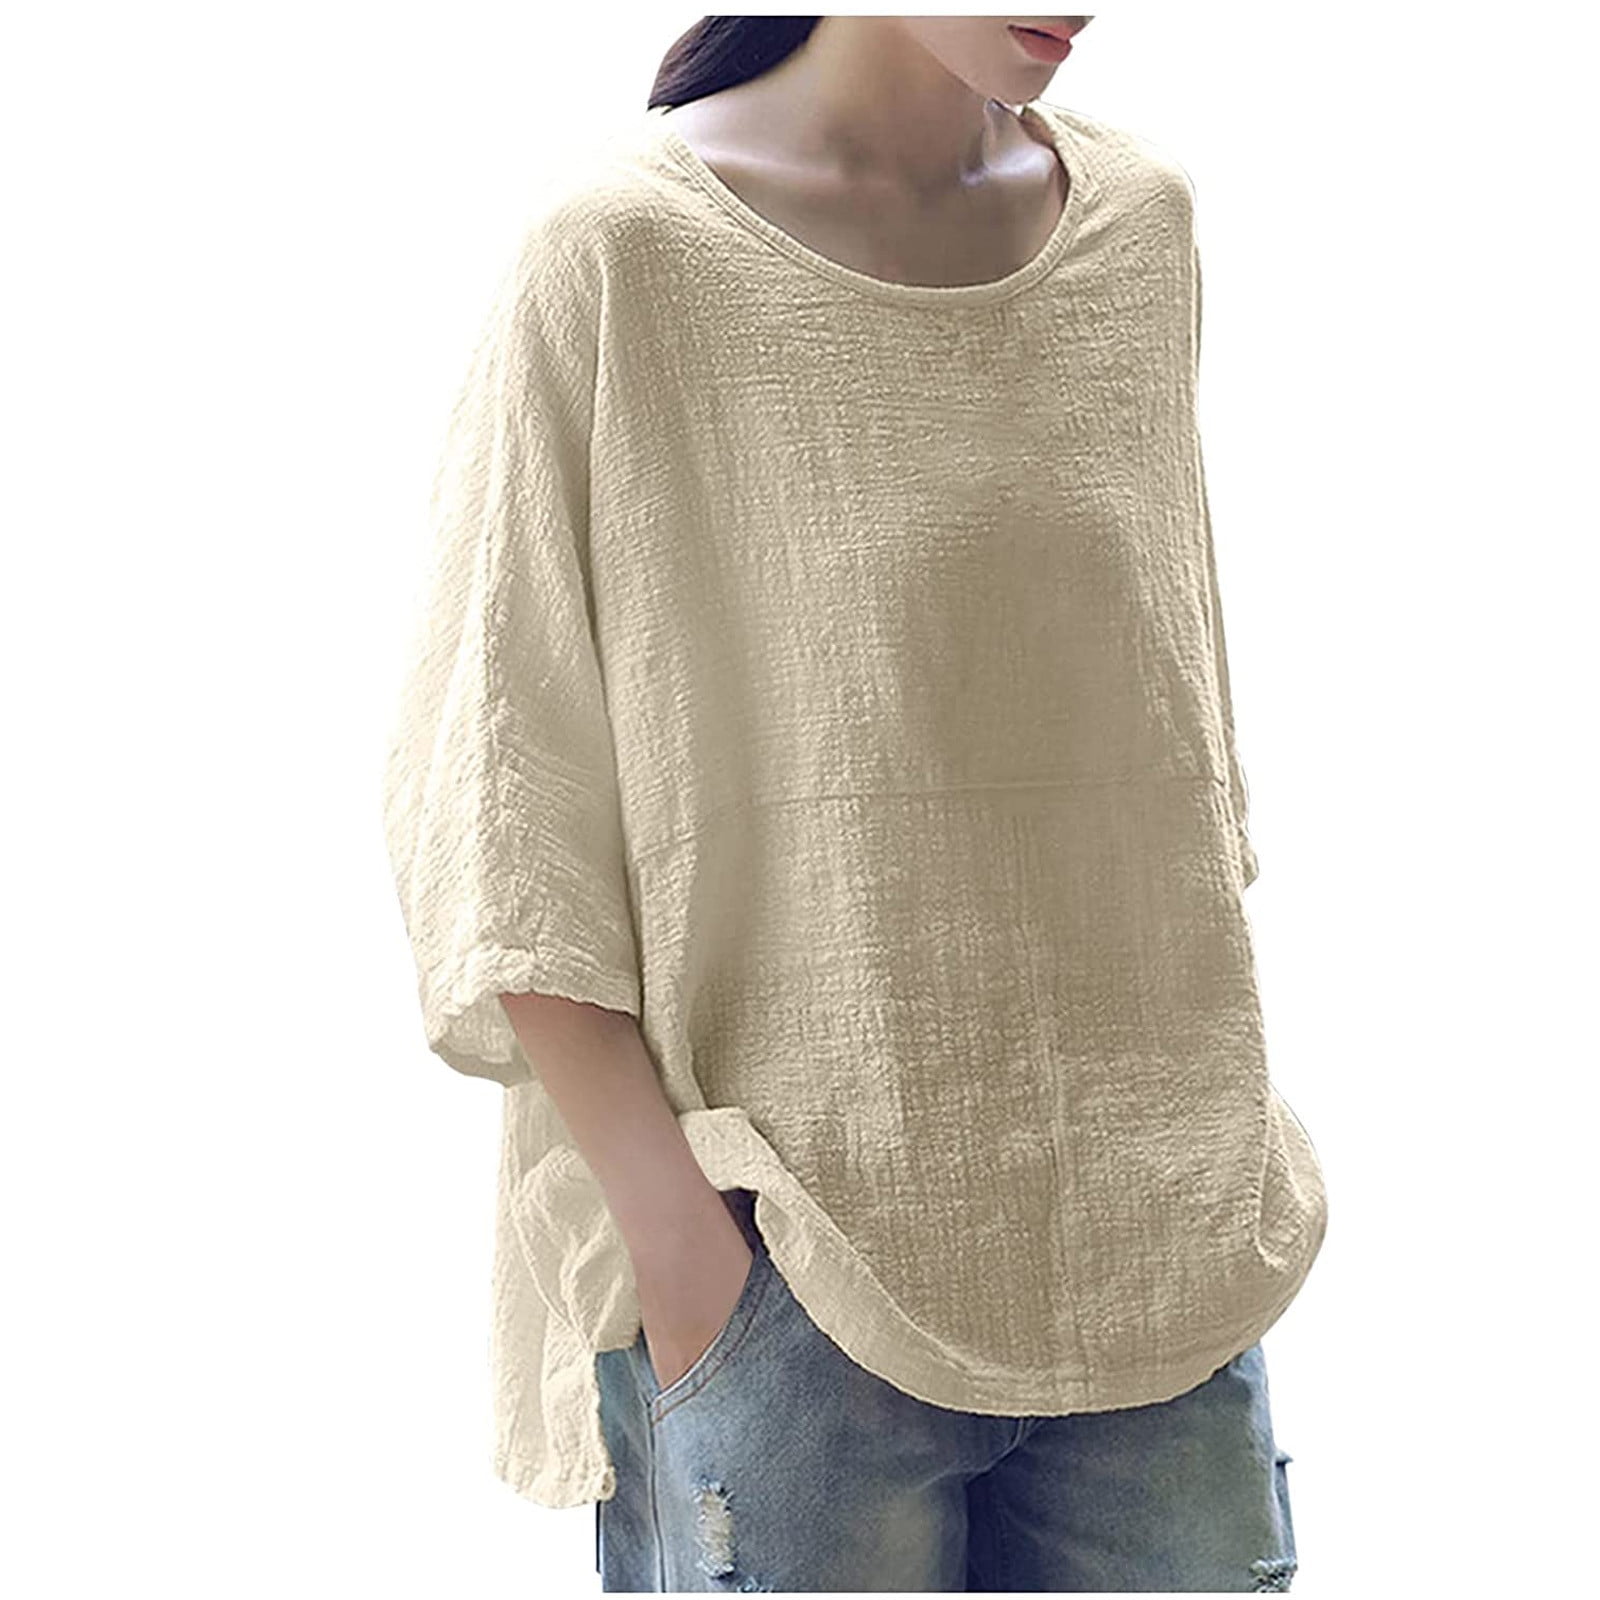 Plus Size Womens 3/4 Sleeve Layering Top - Modest Boat-neck Opening